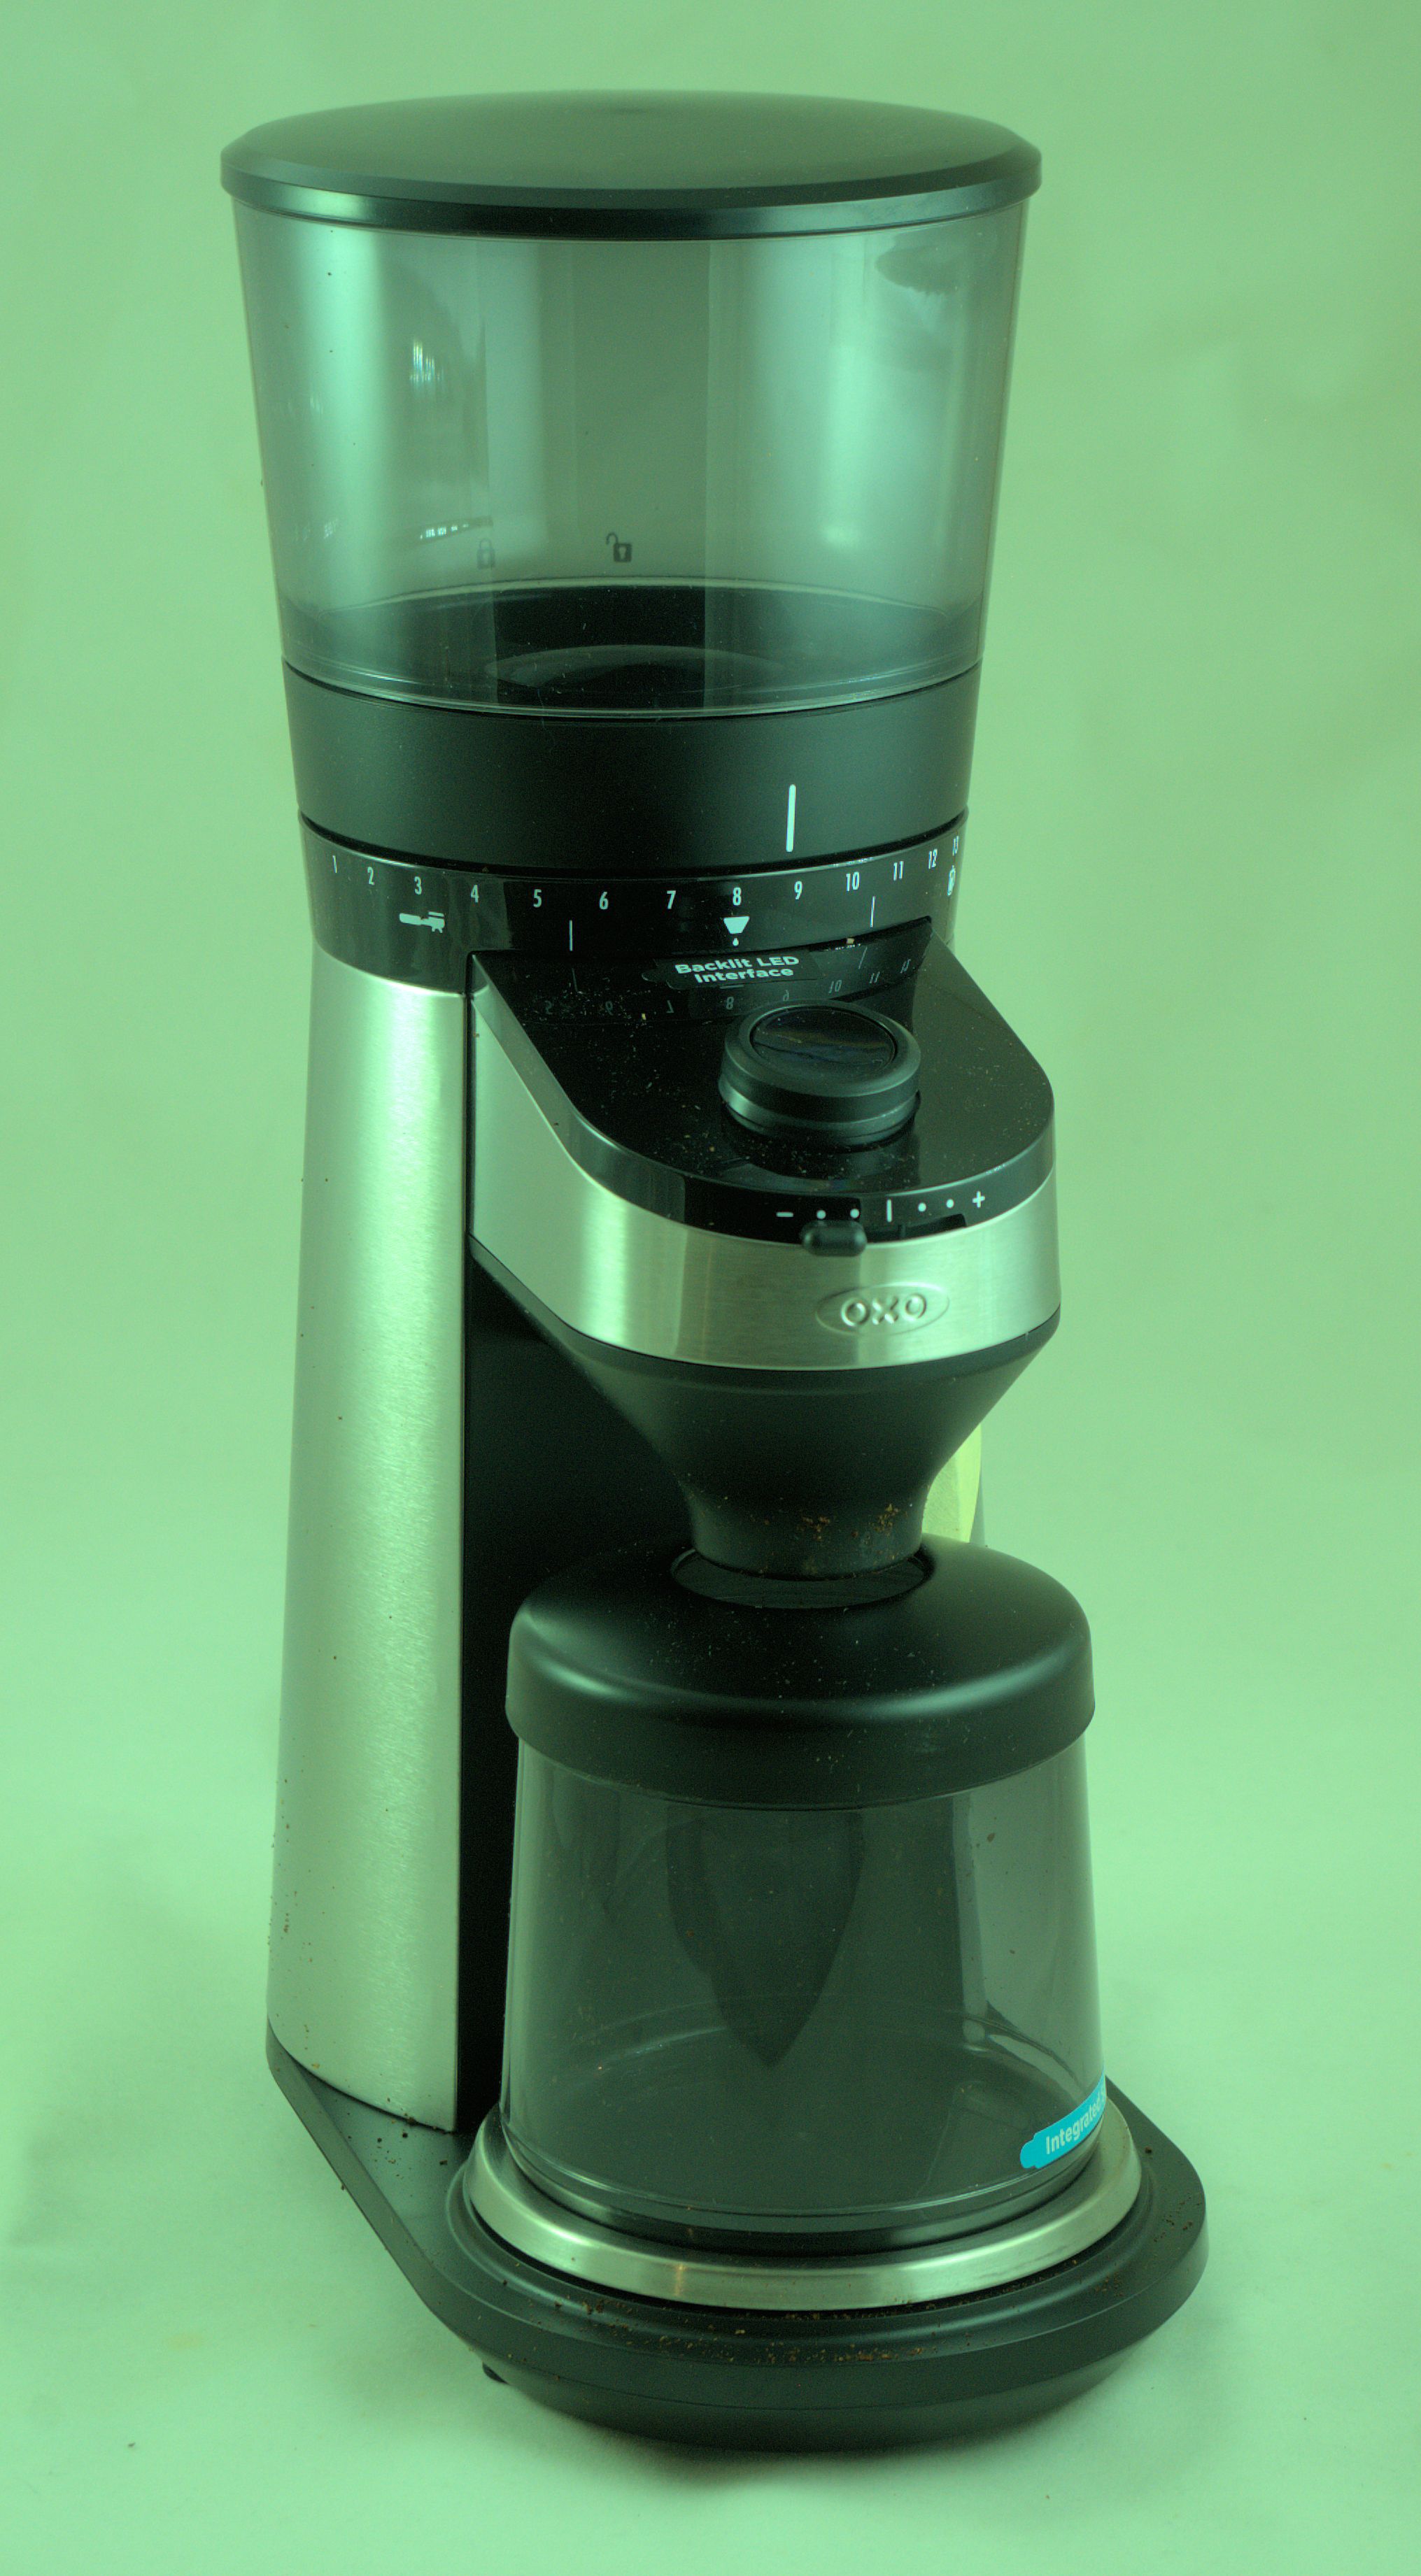 OXO Conical Burr Coffee Grinder with Integrated Scale